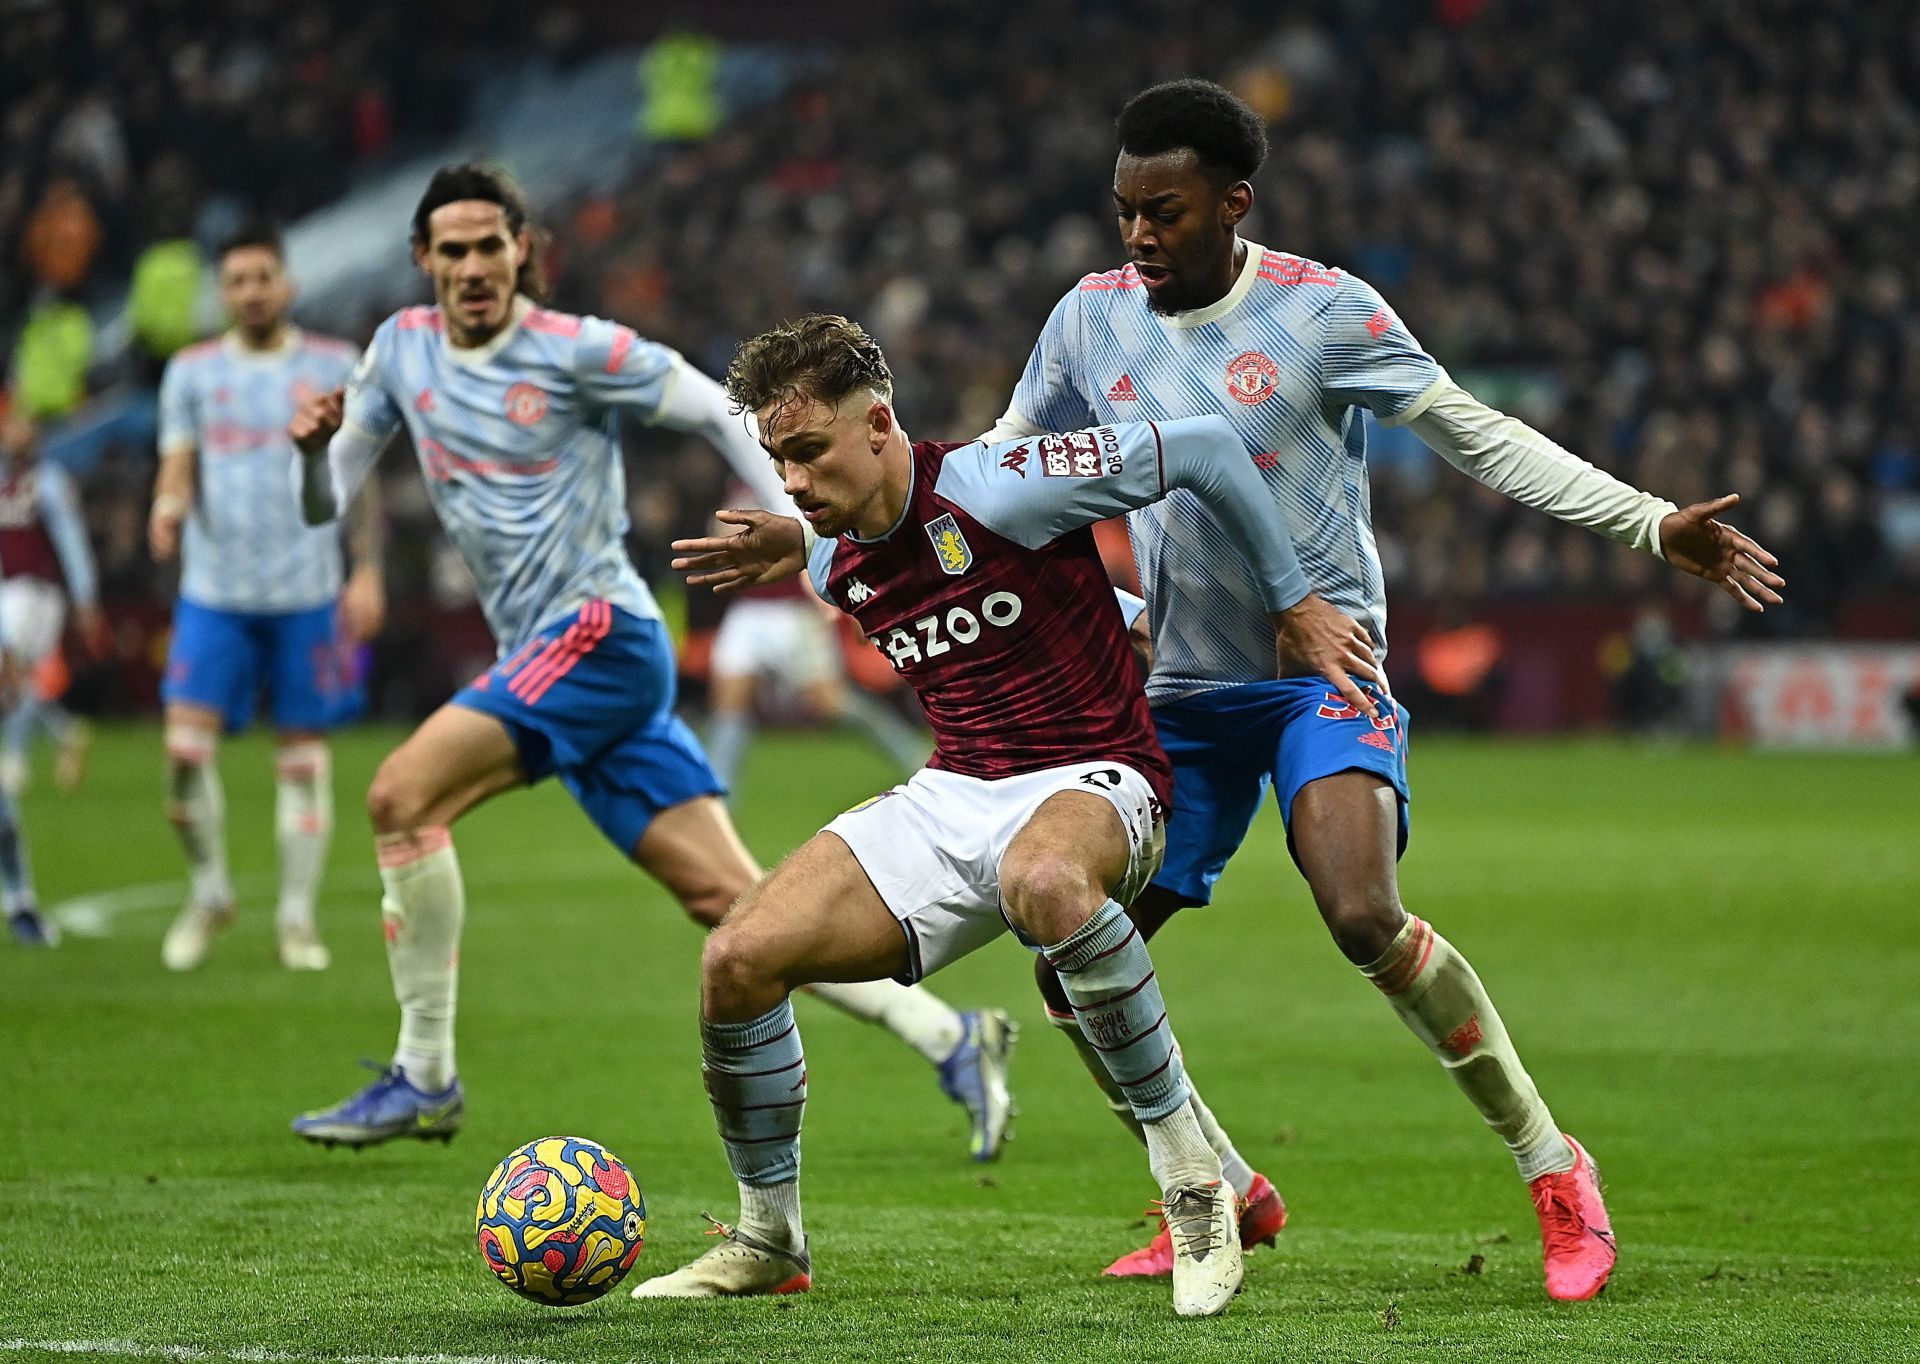 Aston Villa take on Manchester United this weekend